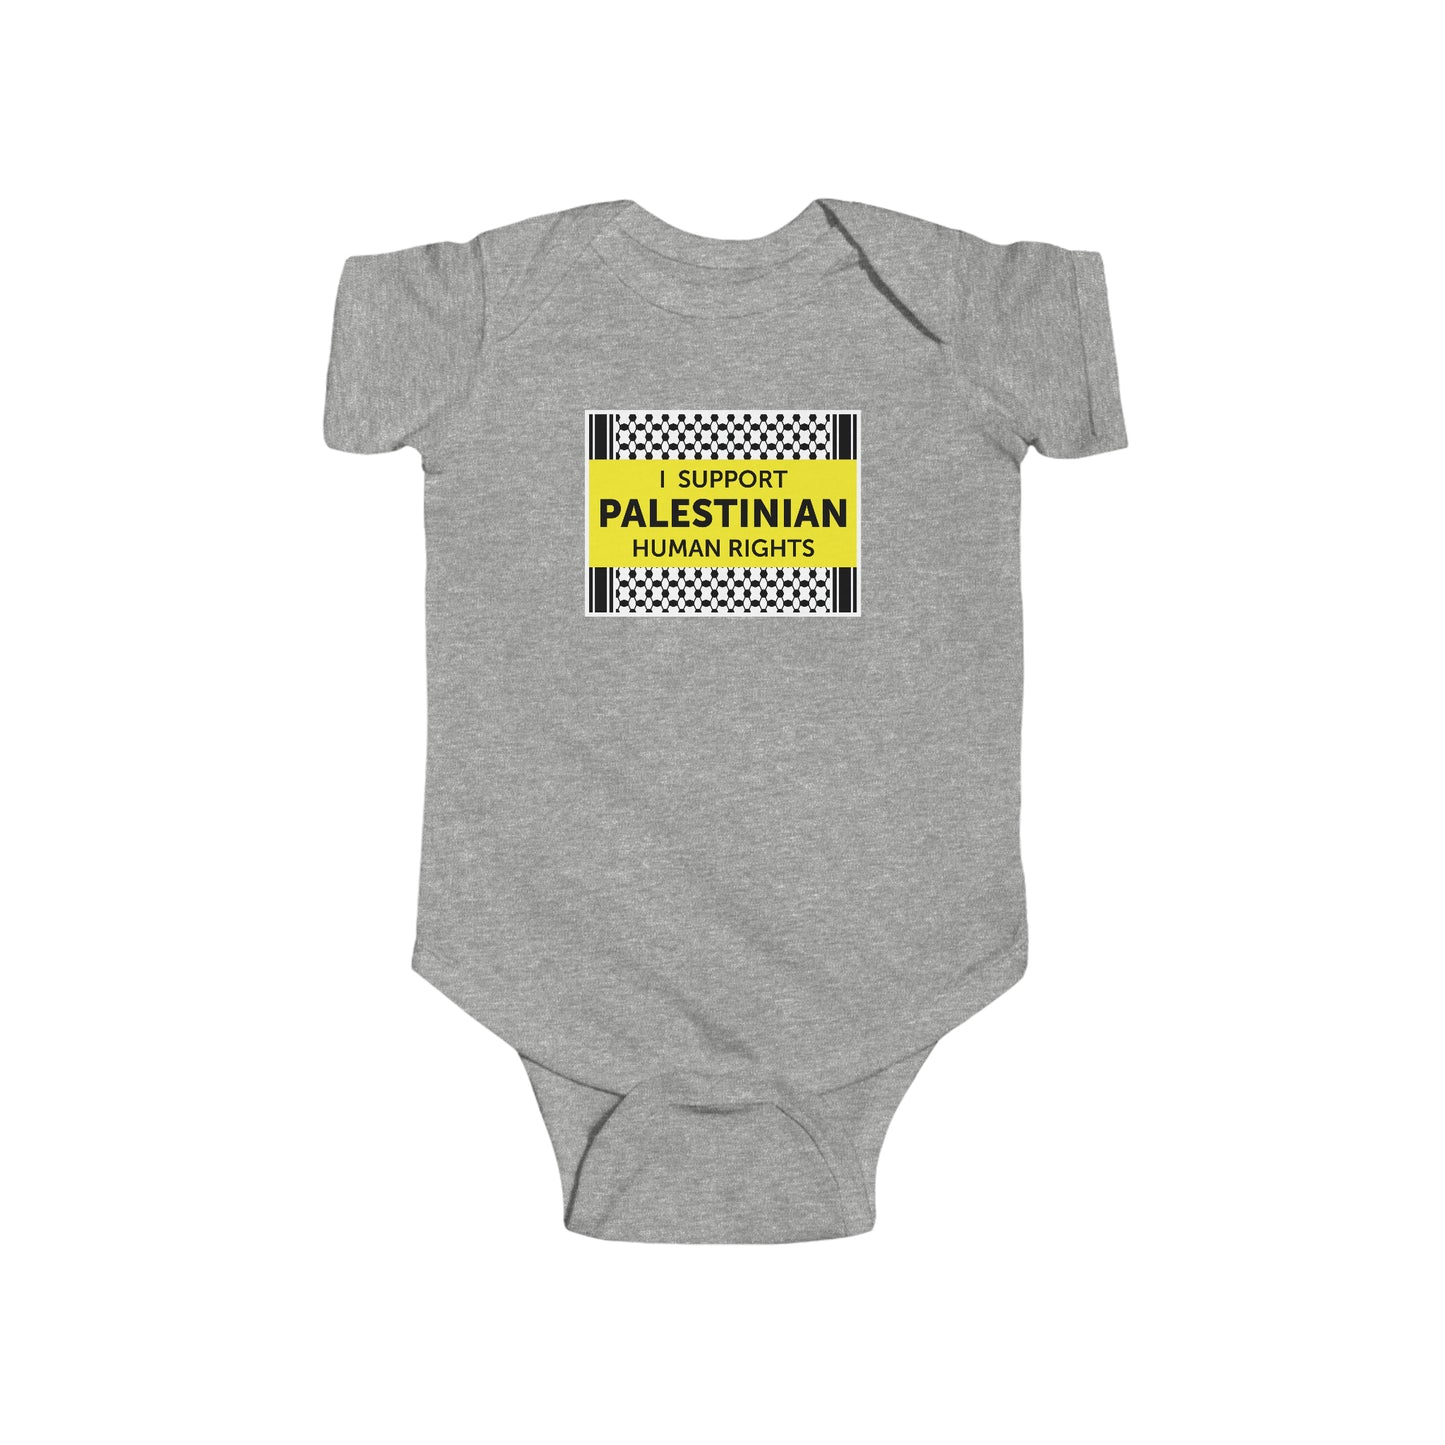 “I Support Palestinian Human Rights” Infant Onesie